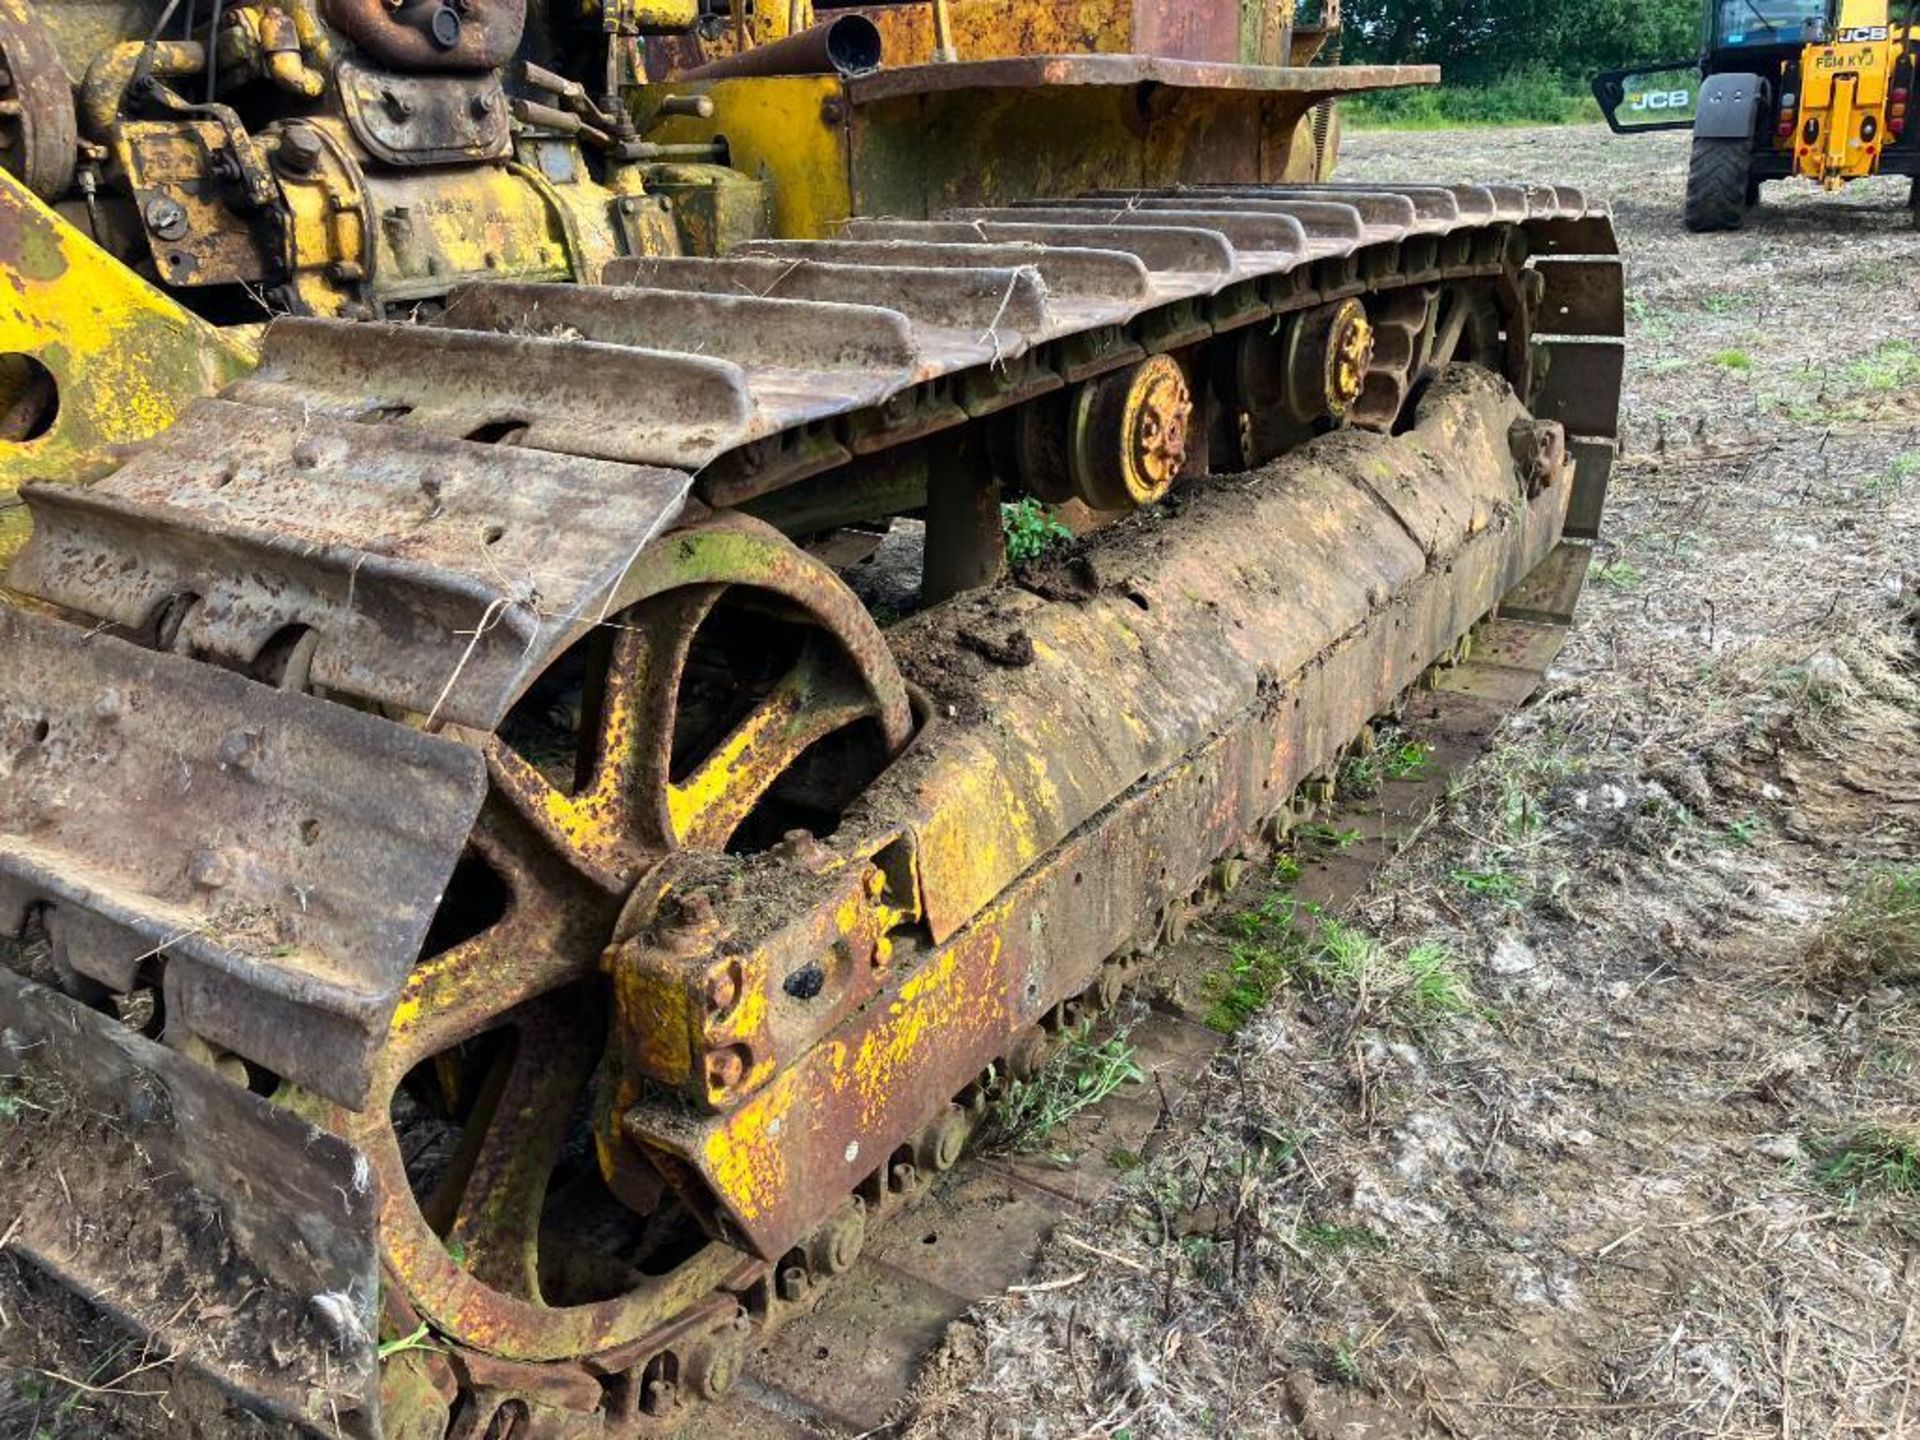 Caterpillar D7 metal tracked crawler with 22" tracks, rear swinging drawbar and rear cable winch - Image 9 of 16